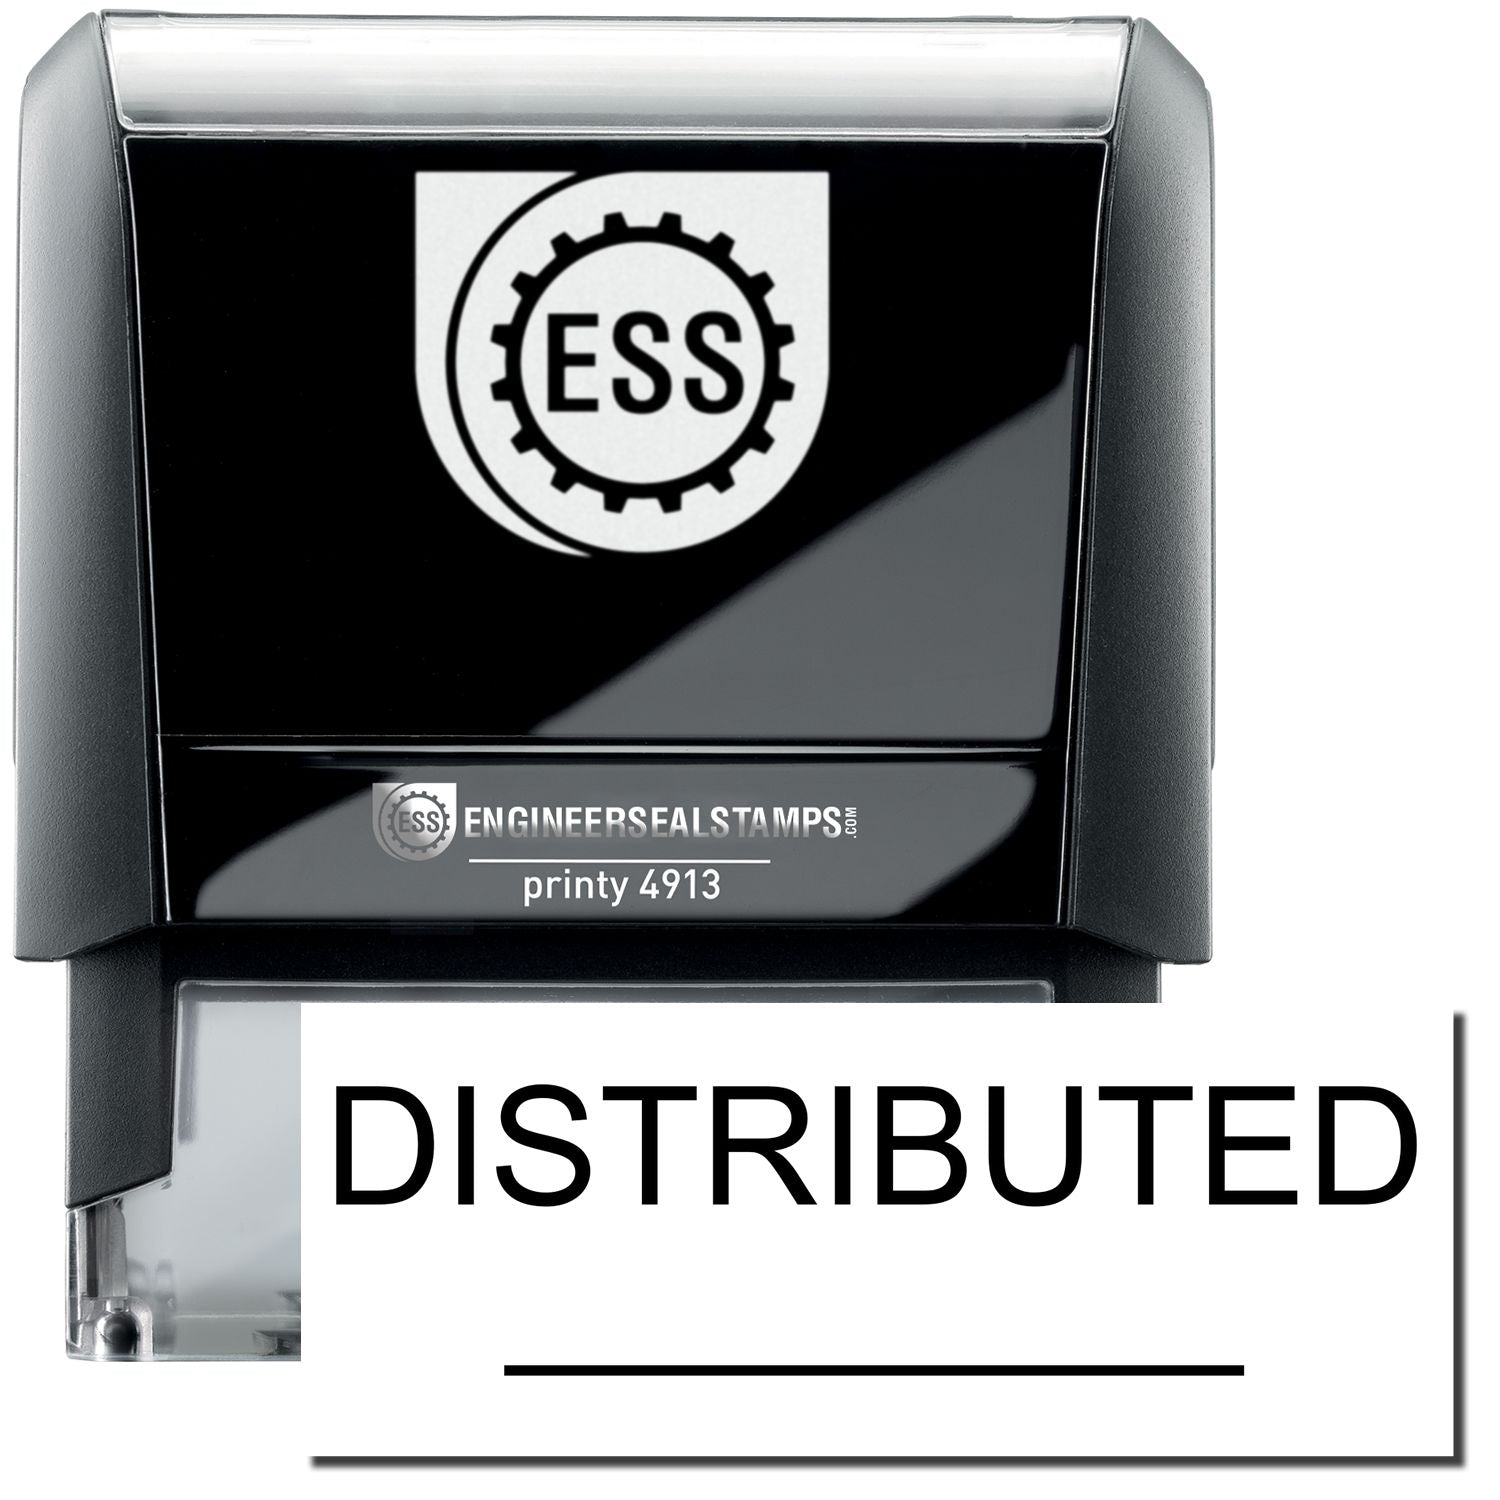 A self-inking stamp with a stamped image showing how the text "DISTRIBUTED" in a large bold font with a line is displayed by it.